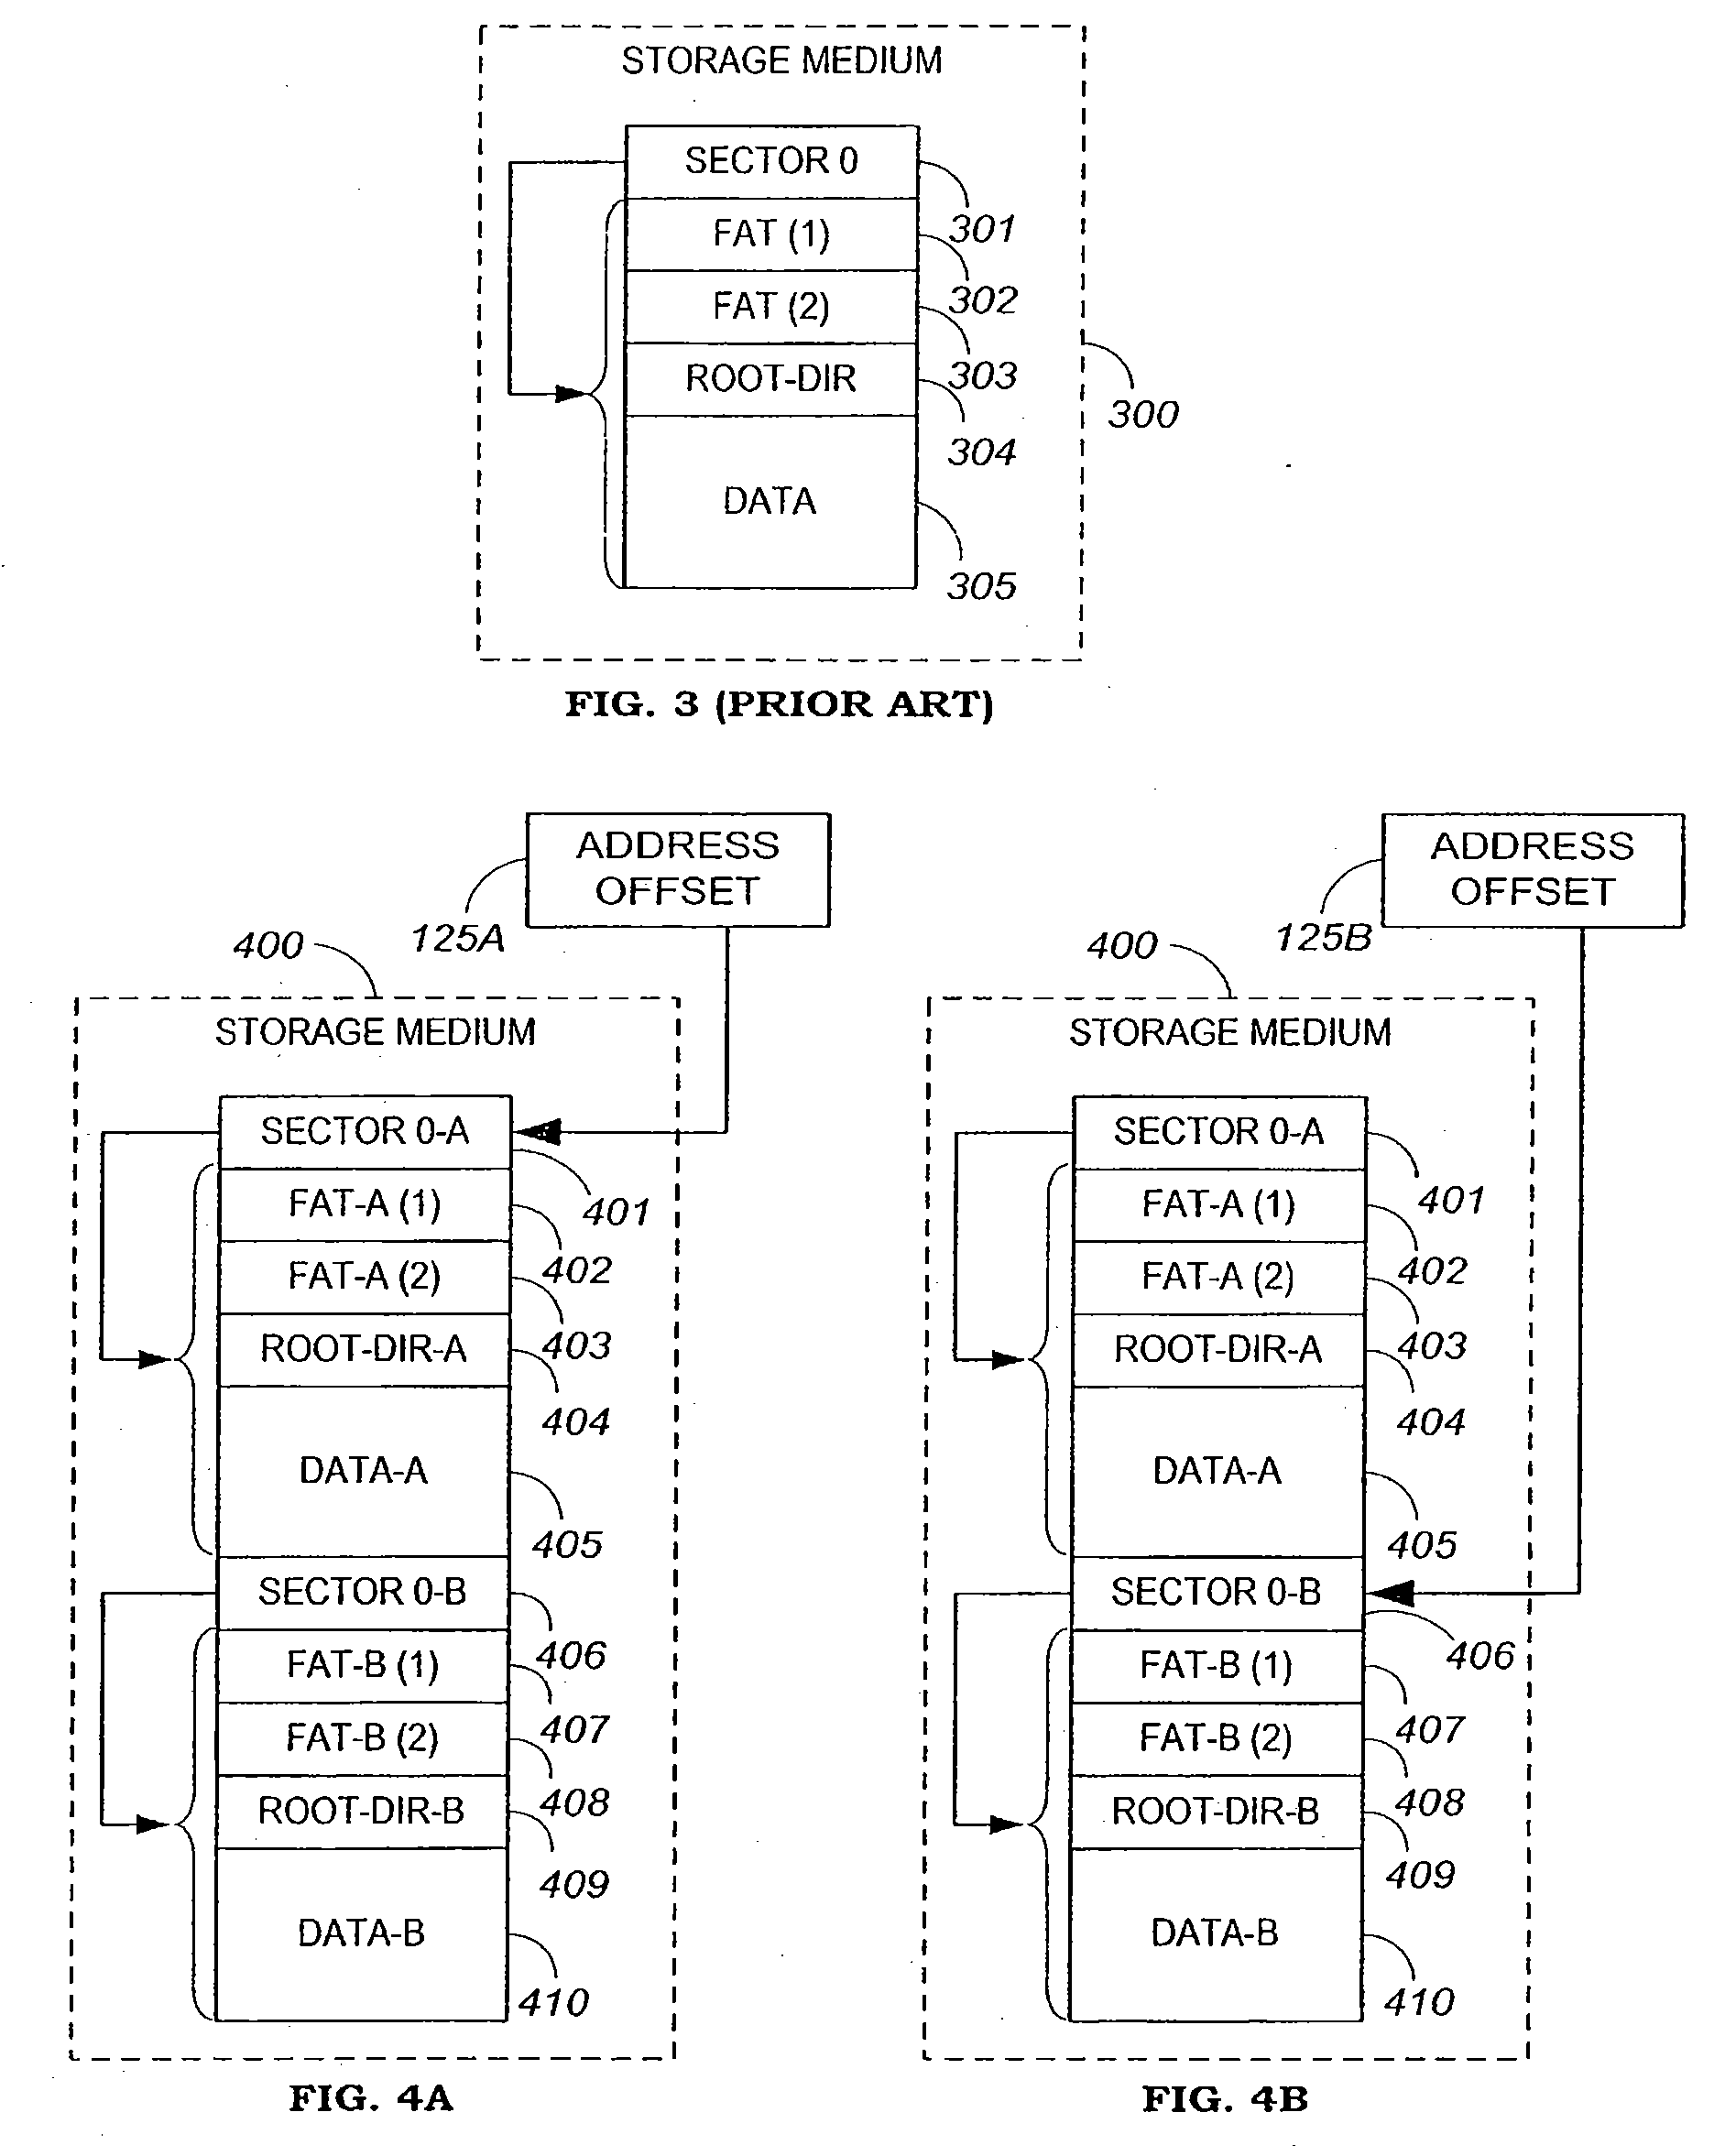 Apparatus and Method For Securing Data on a Portable Storage Device